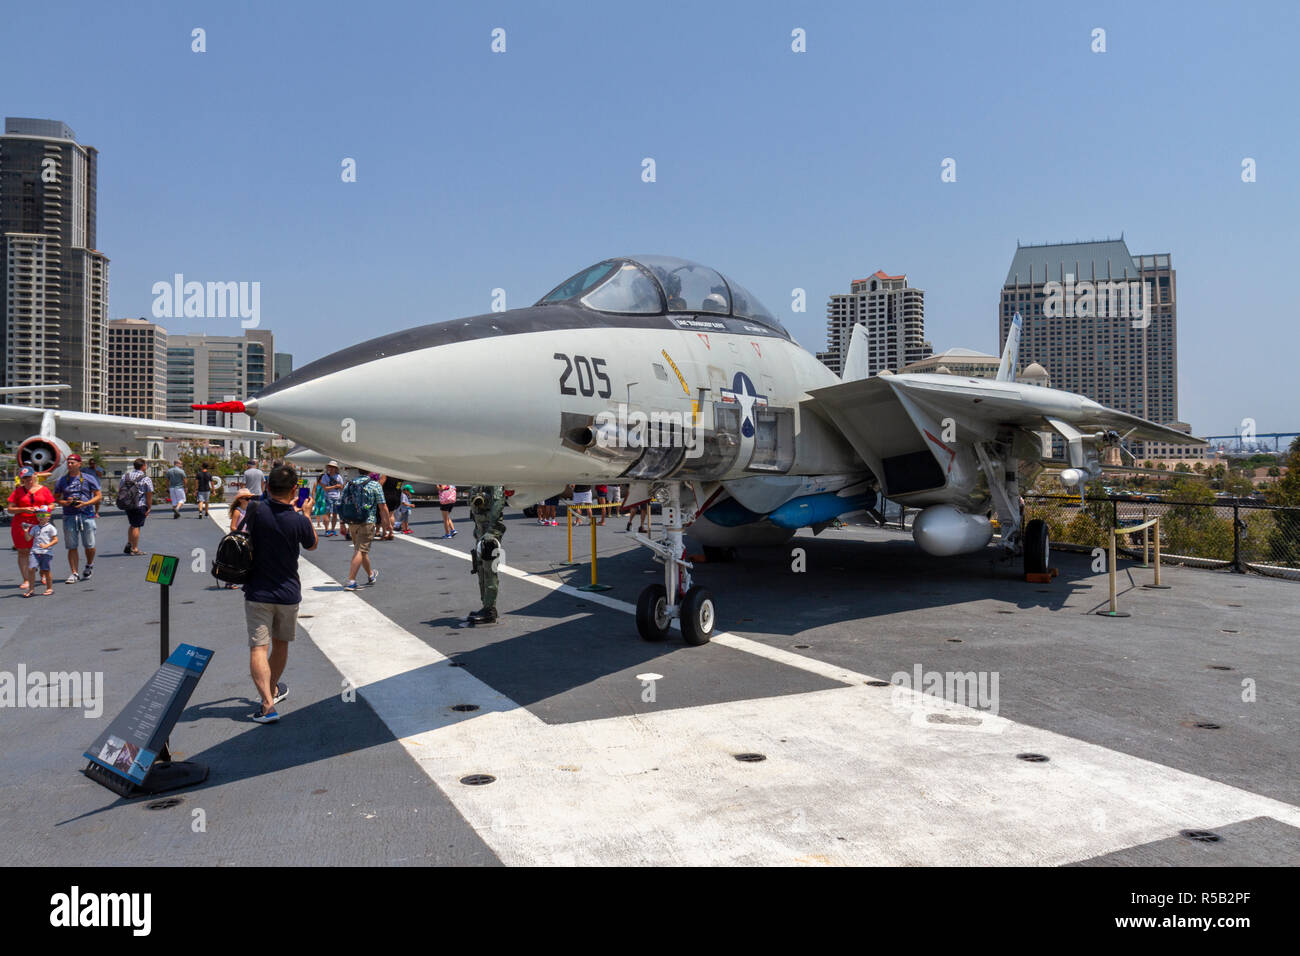 F-14 Tomcat fighter aircraft, USS Midway Museum, San Diego, California, United States. Stock Photo